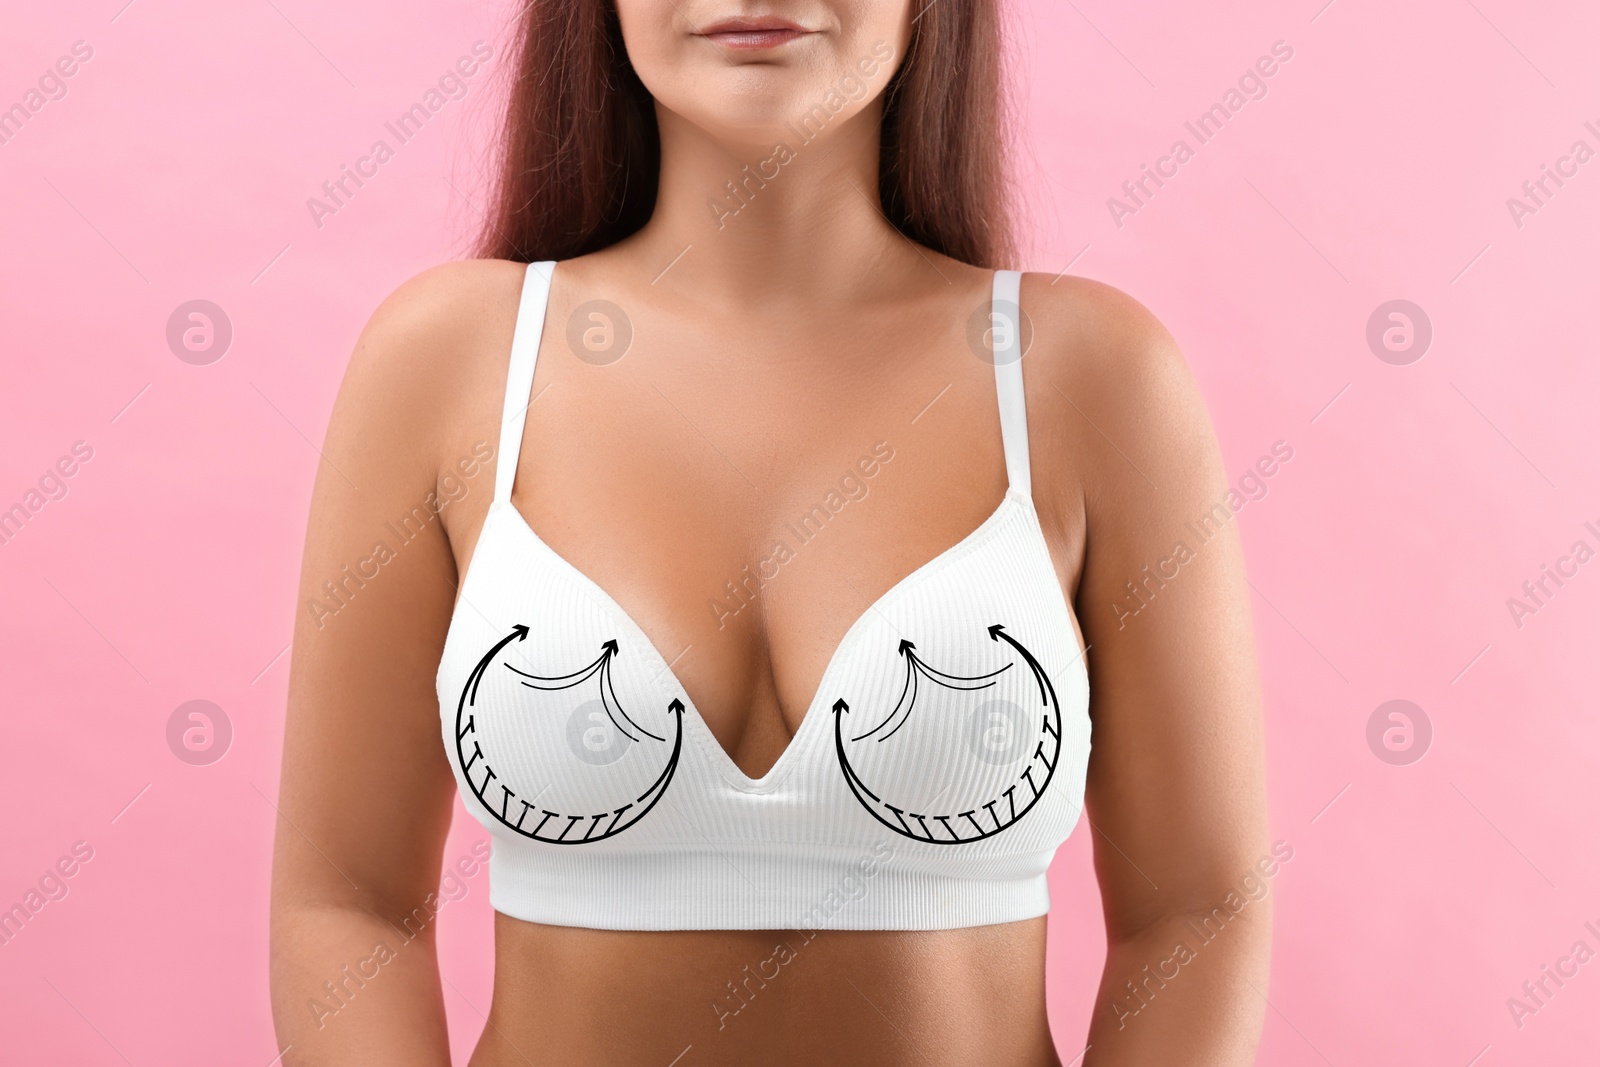 Image of Breast surgery. Woman with markings on bra against pink background, closeup